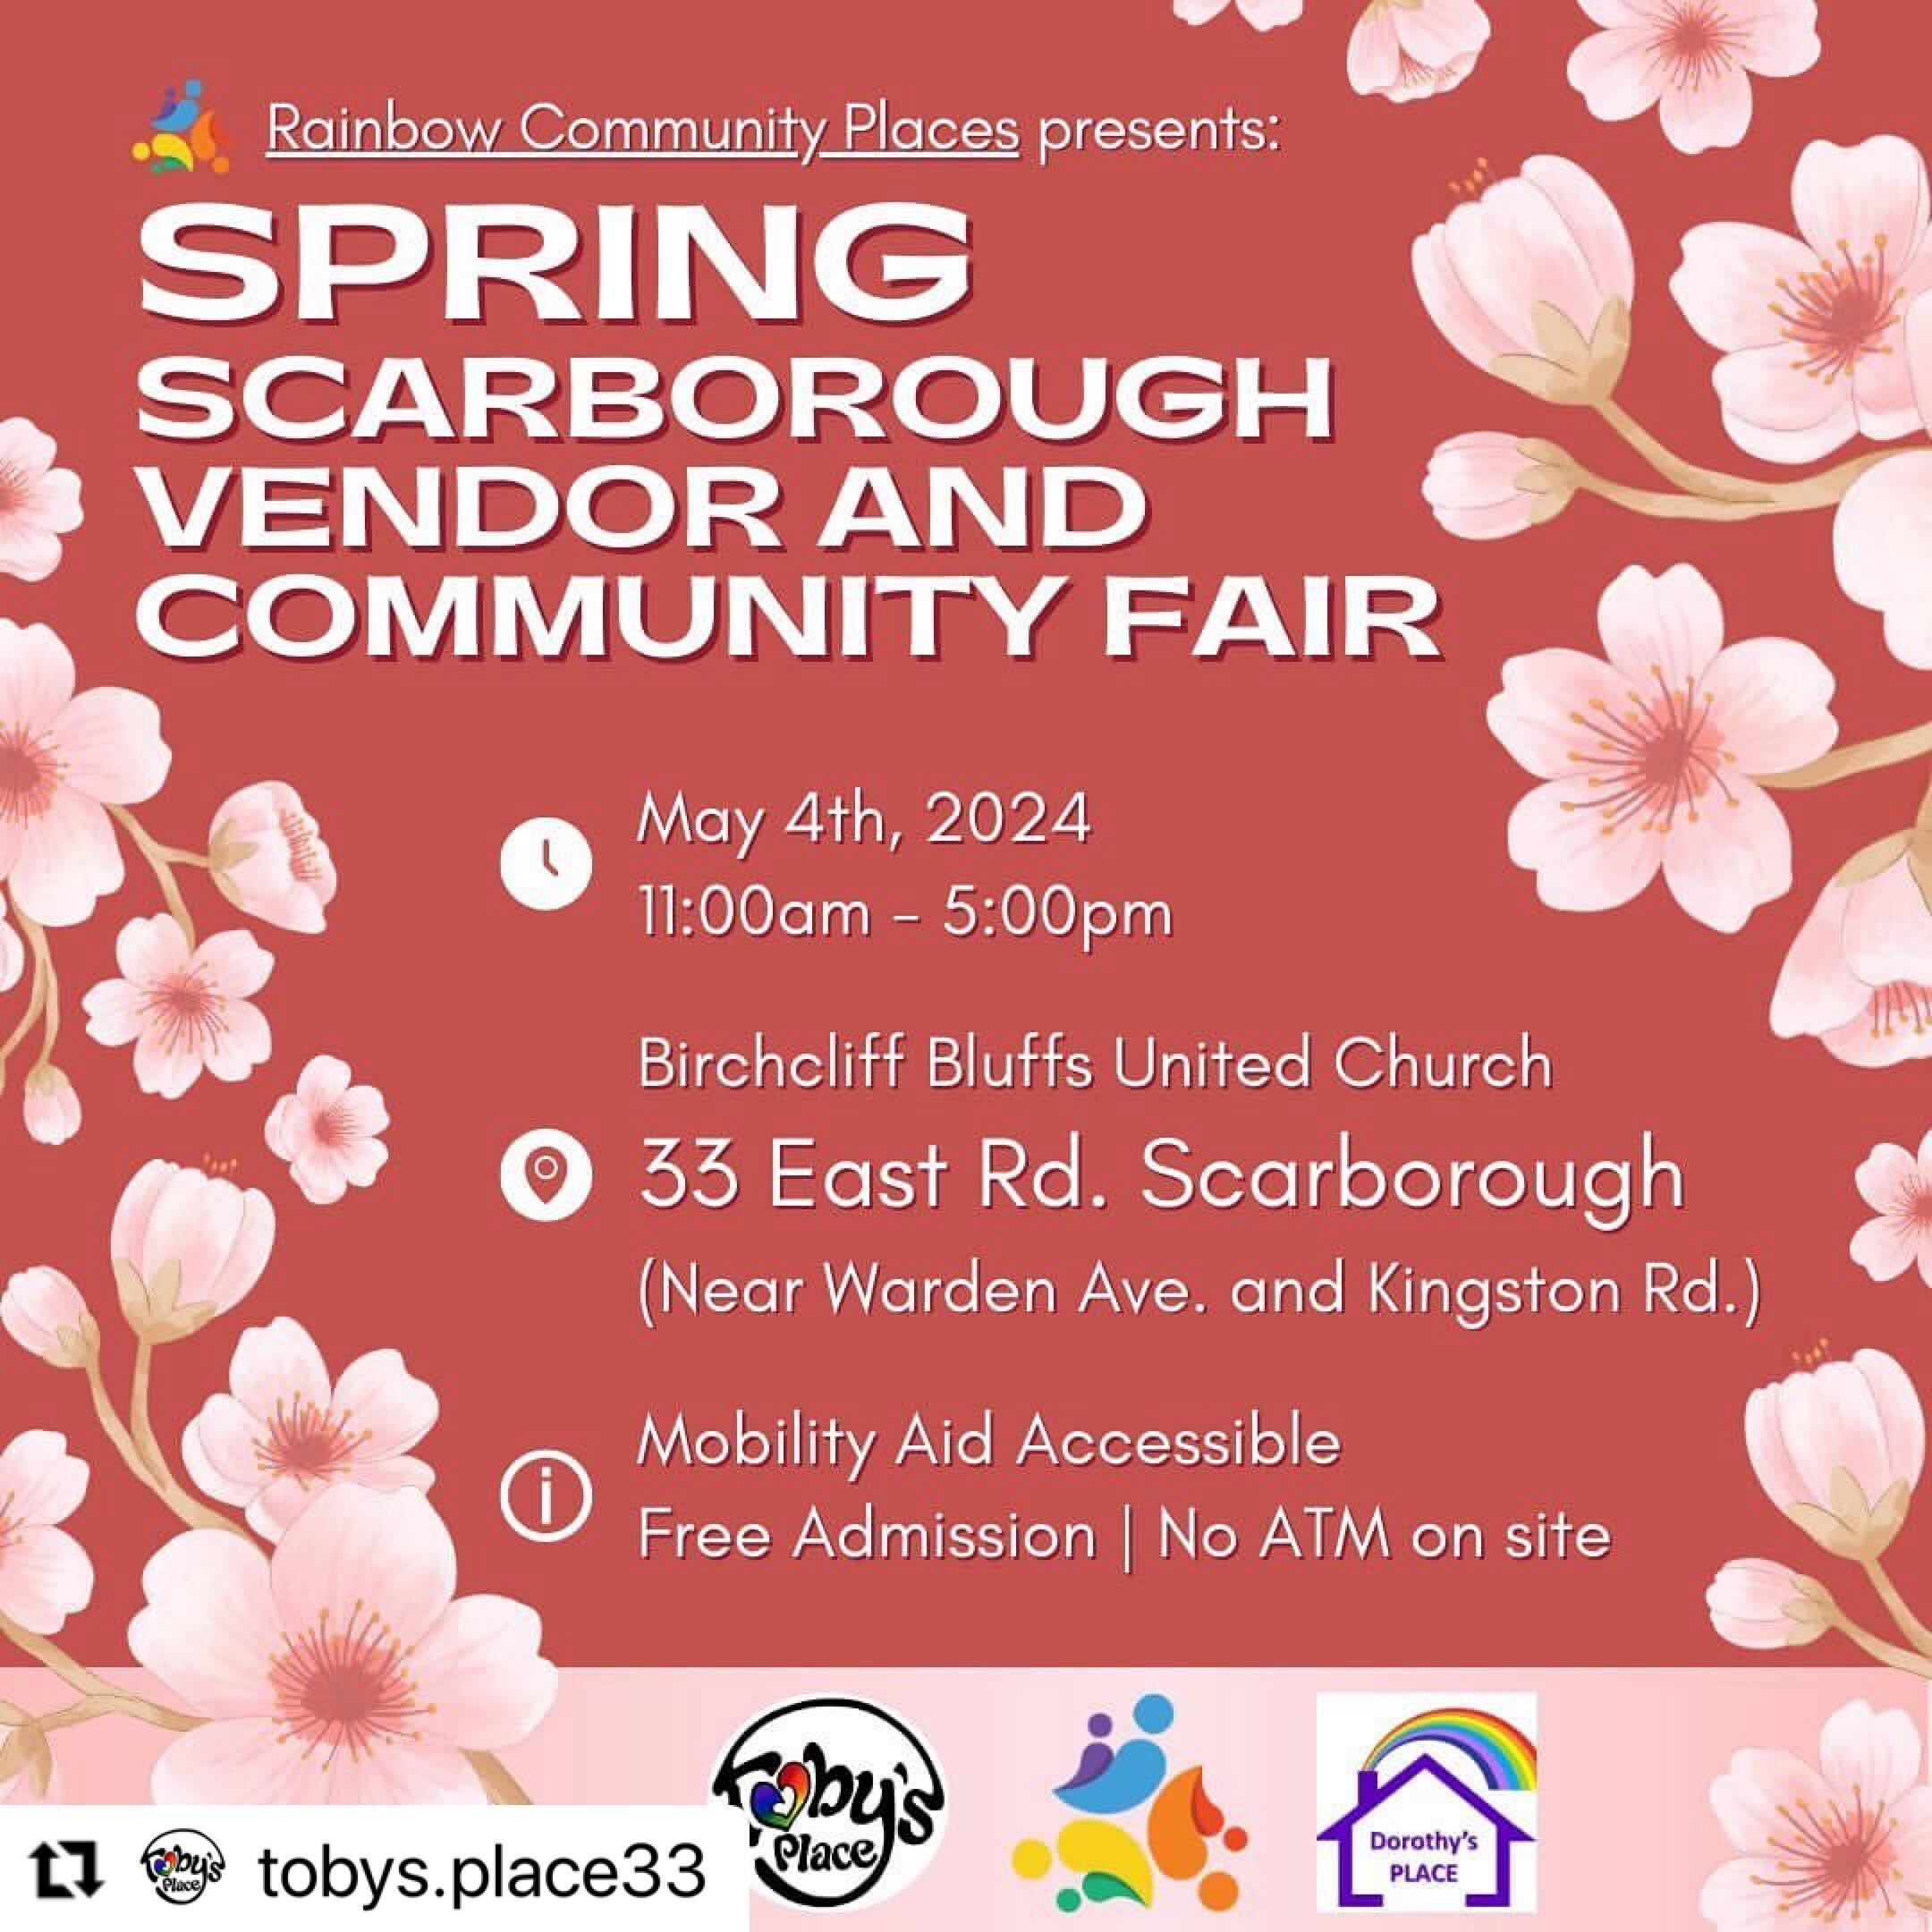 This Saturday, I&rsquo;ll have a table at @rainbowcommunityplaces Scarborough community fair! Come on out to support 2SLGBTQIA+ youth, and say hi ☺️🌈🏳️&zwj;🌈

@tobys.place33 

#lgbtq #lgbt #queer #scarborough #pride #youth